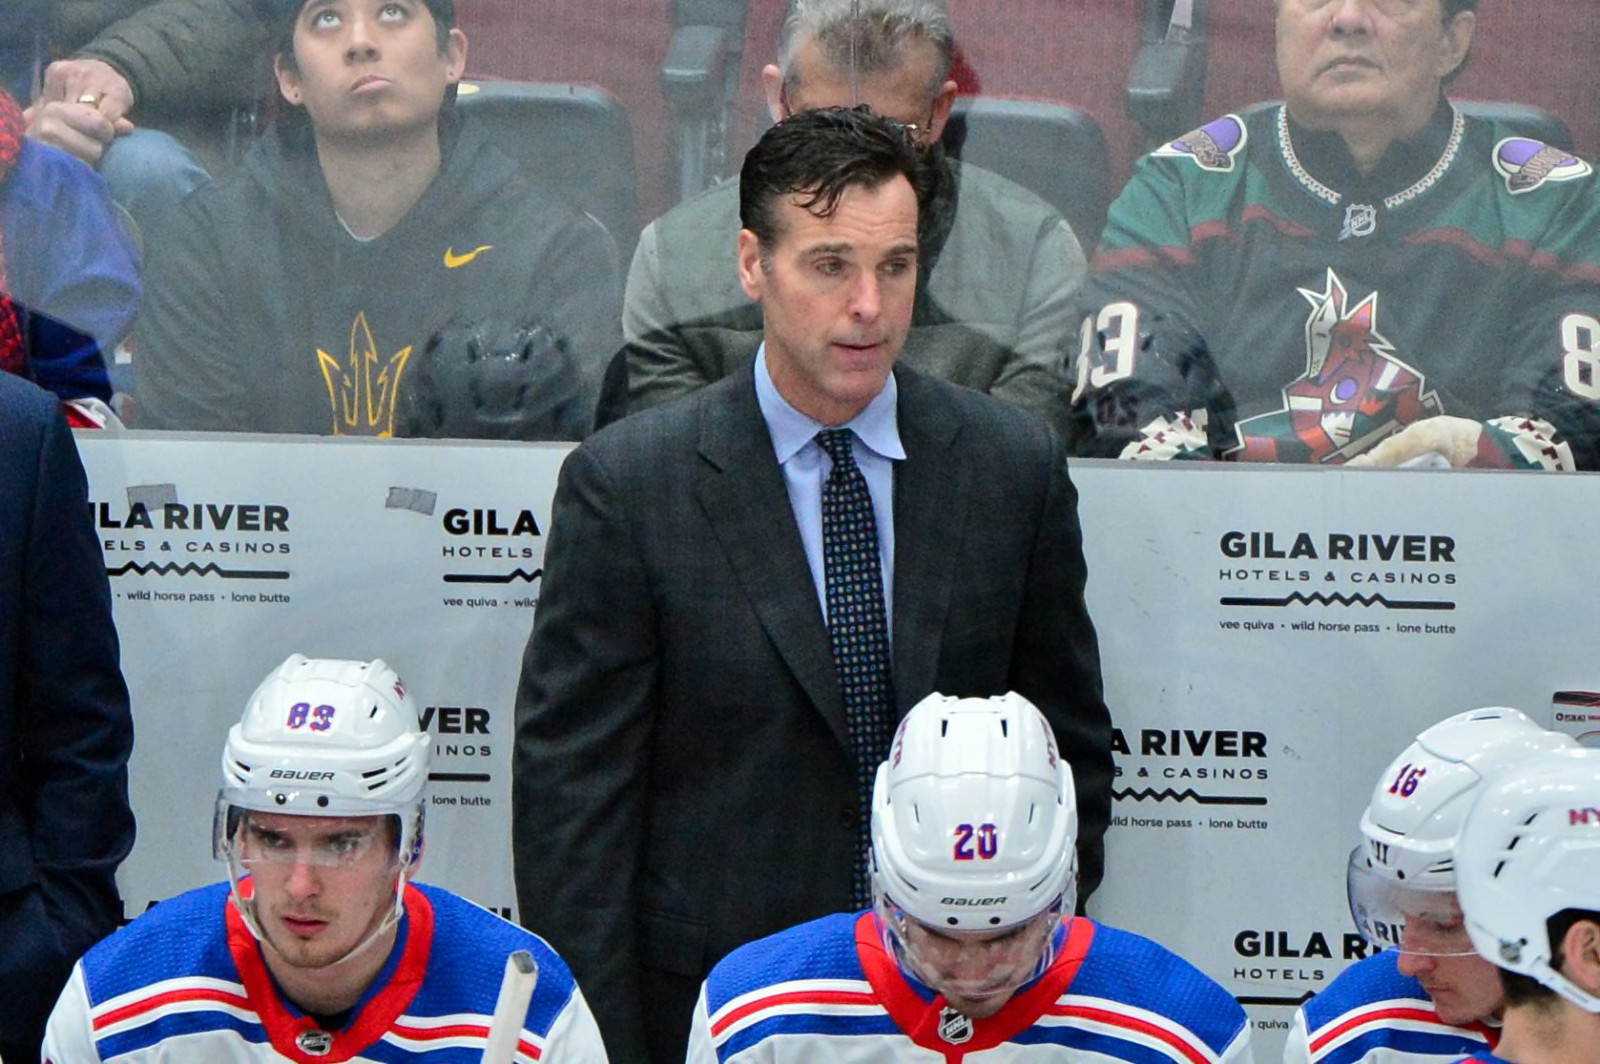 What Are Rangers Practices Like Under Coach Quinn? 